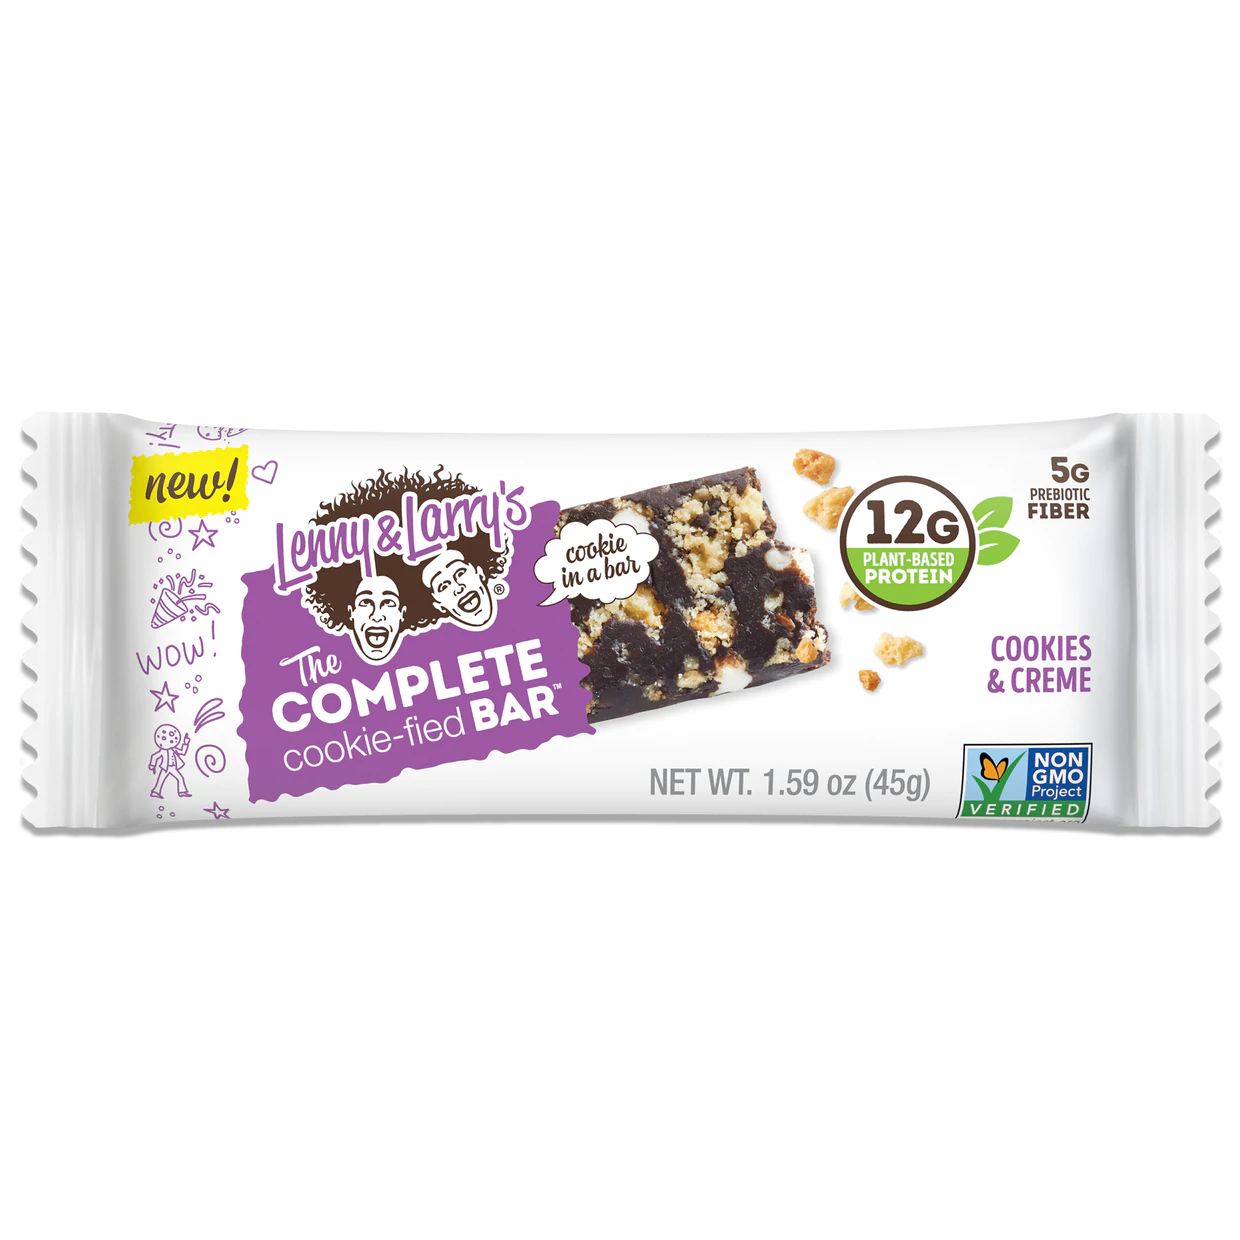 Lenny & Larry’s The Complete Cookie-fied Vegan Protein Bar (1 bar) Protein Snacks Cookie & Cream  BEST BY MARCH/2023 Lenny & Larry lenny-larry-s-the-complete-cookie-filled-bar-1-bar